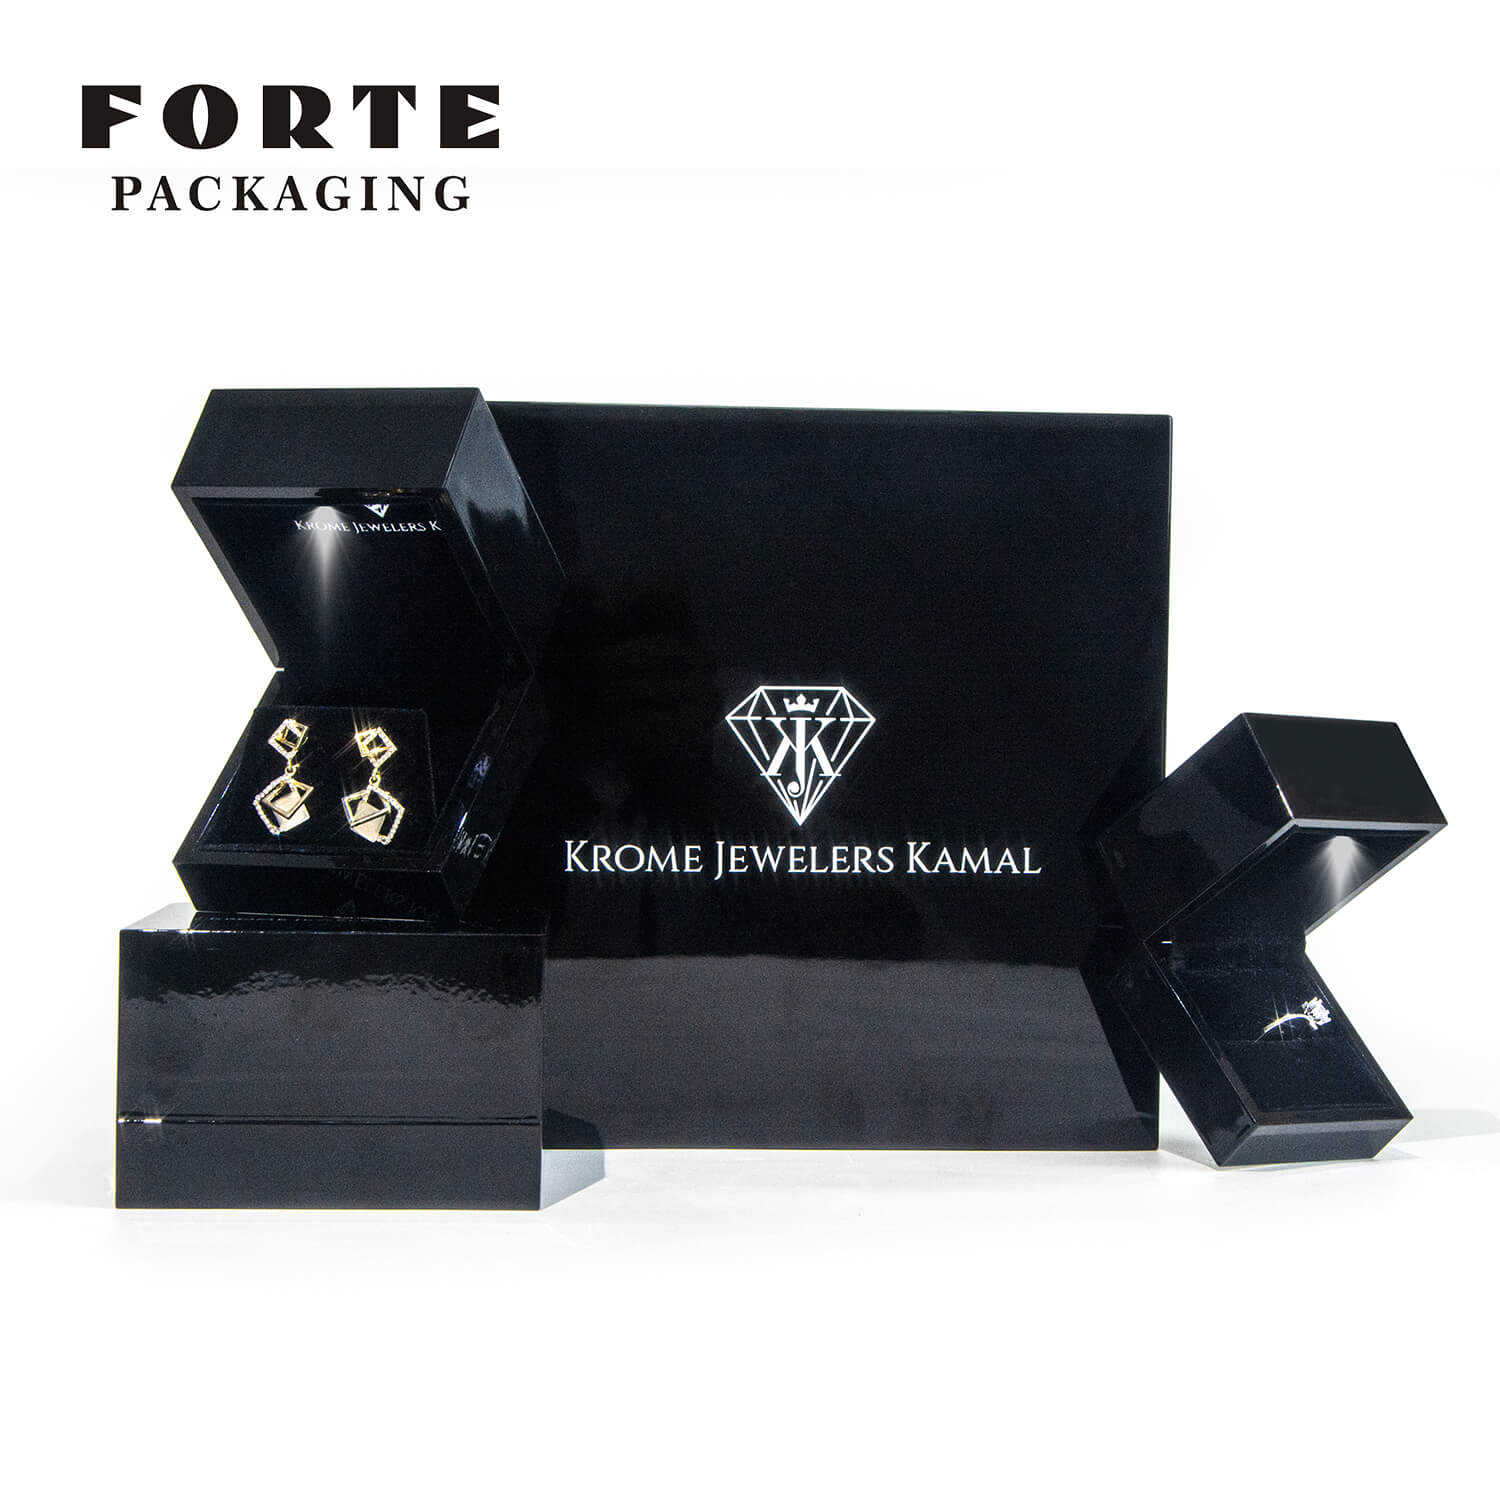 Forte Newest design black shiny Piano lacquer painting LED jewelry packaging box custom logo printed ring storage box with LED light